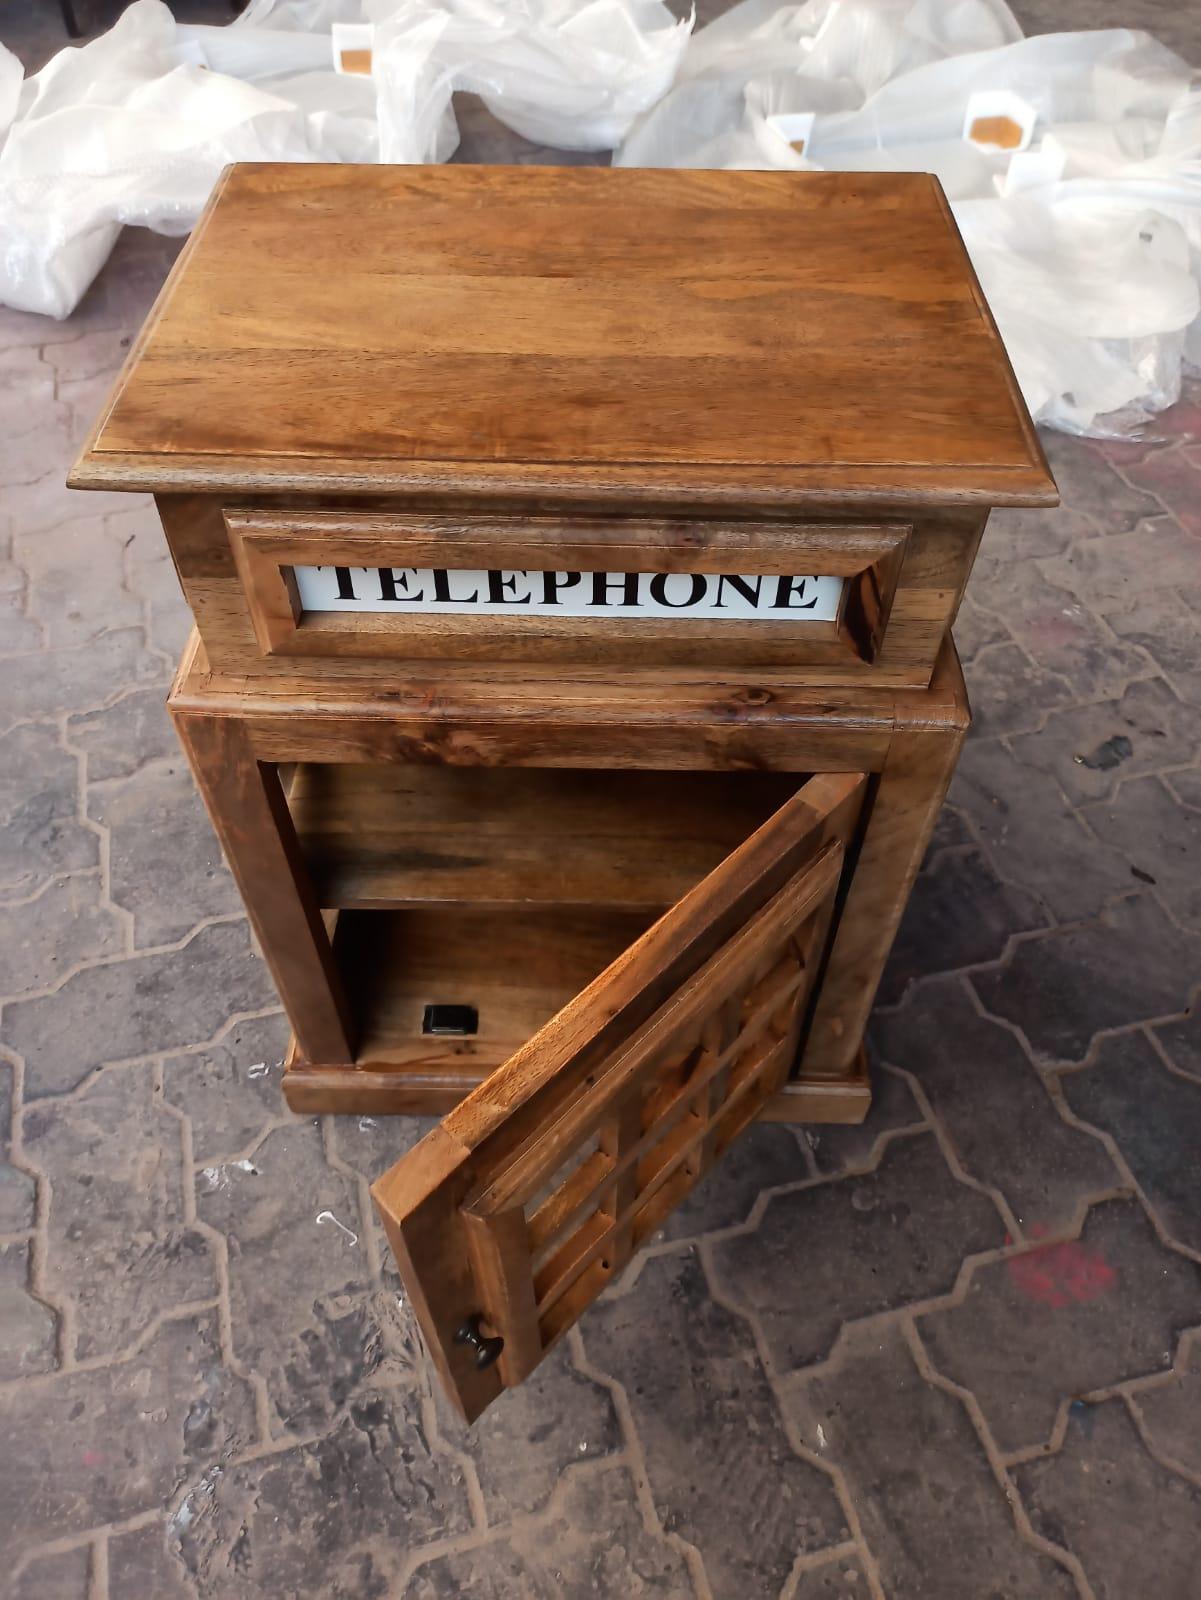 Handcrafted Small Telephone Side Table - Happyware Home Pvt Ltd